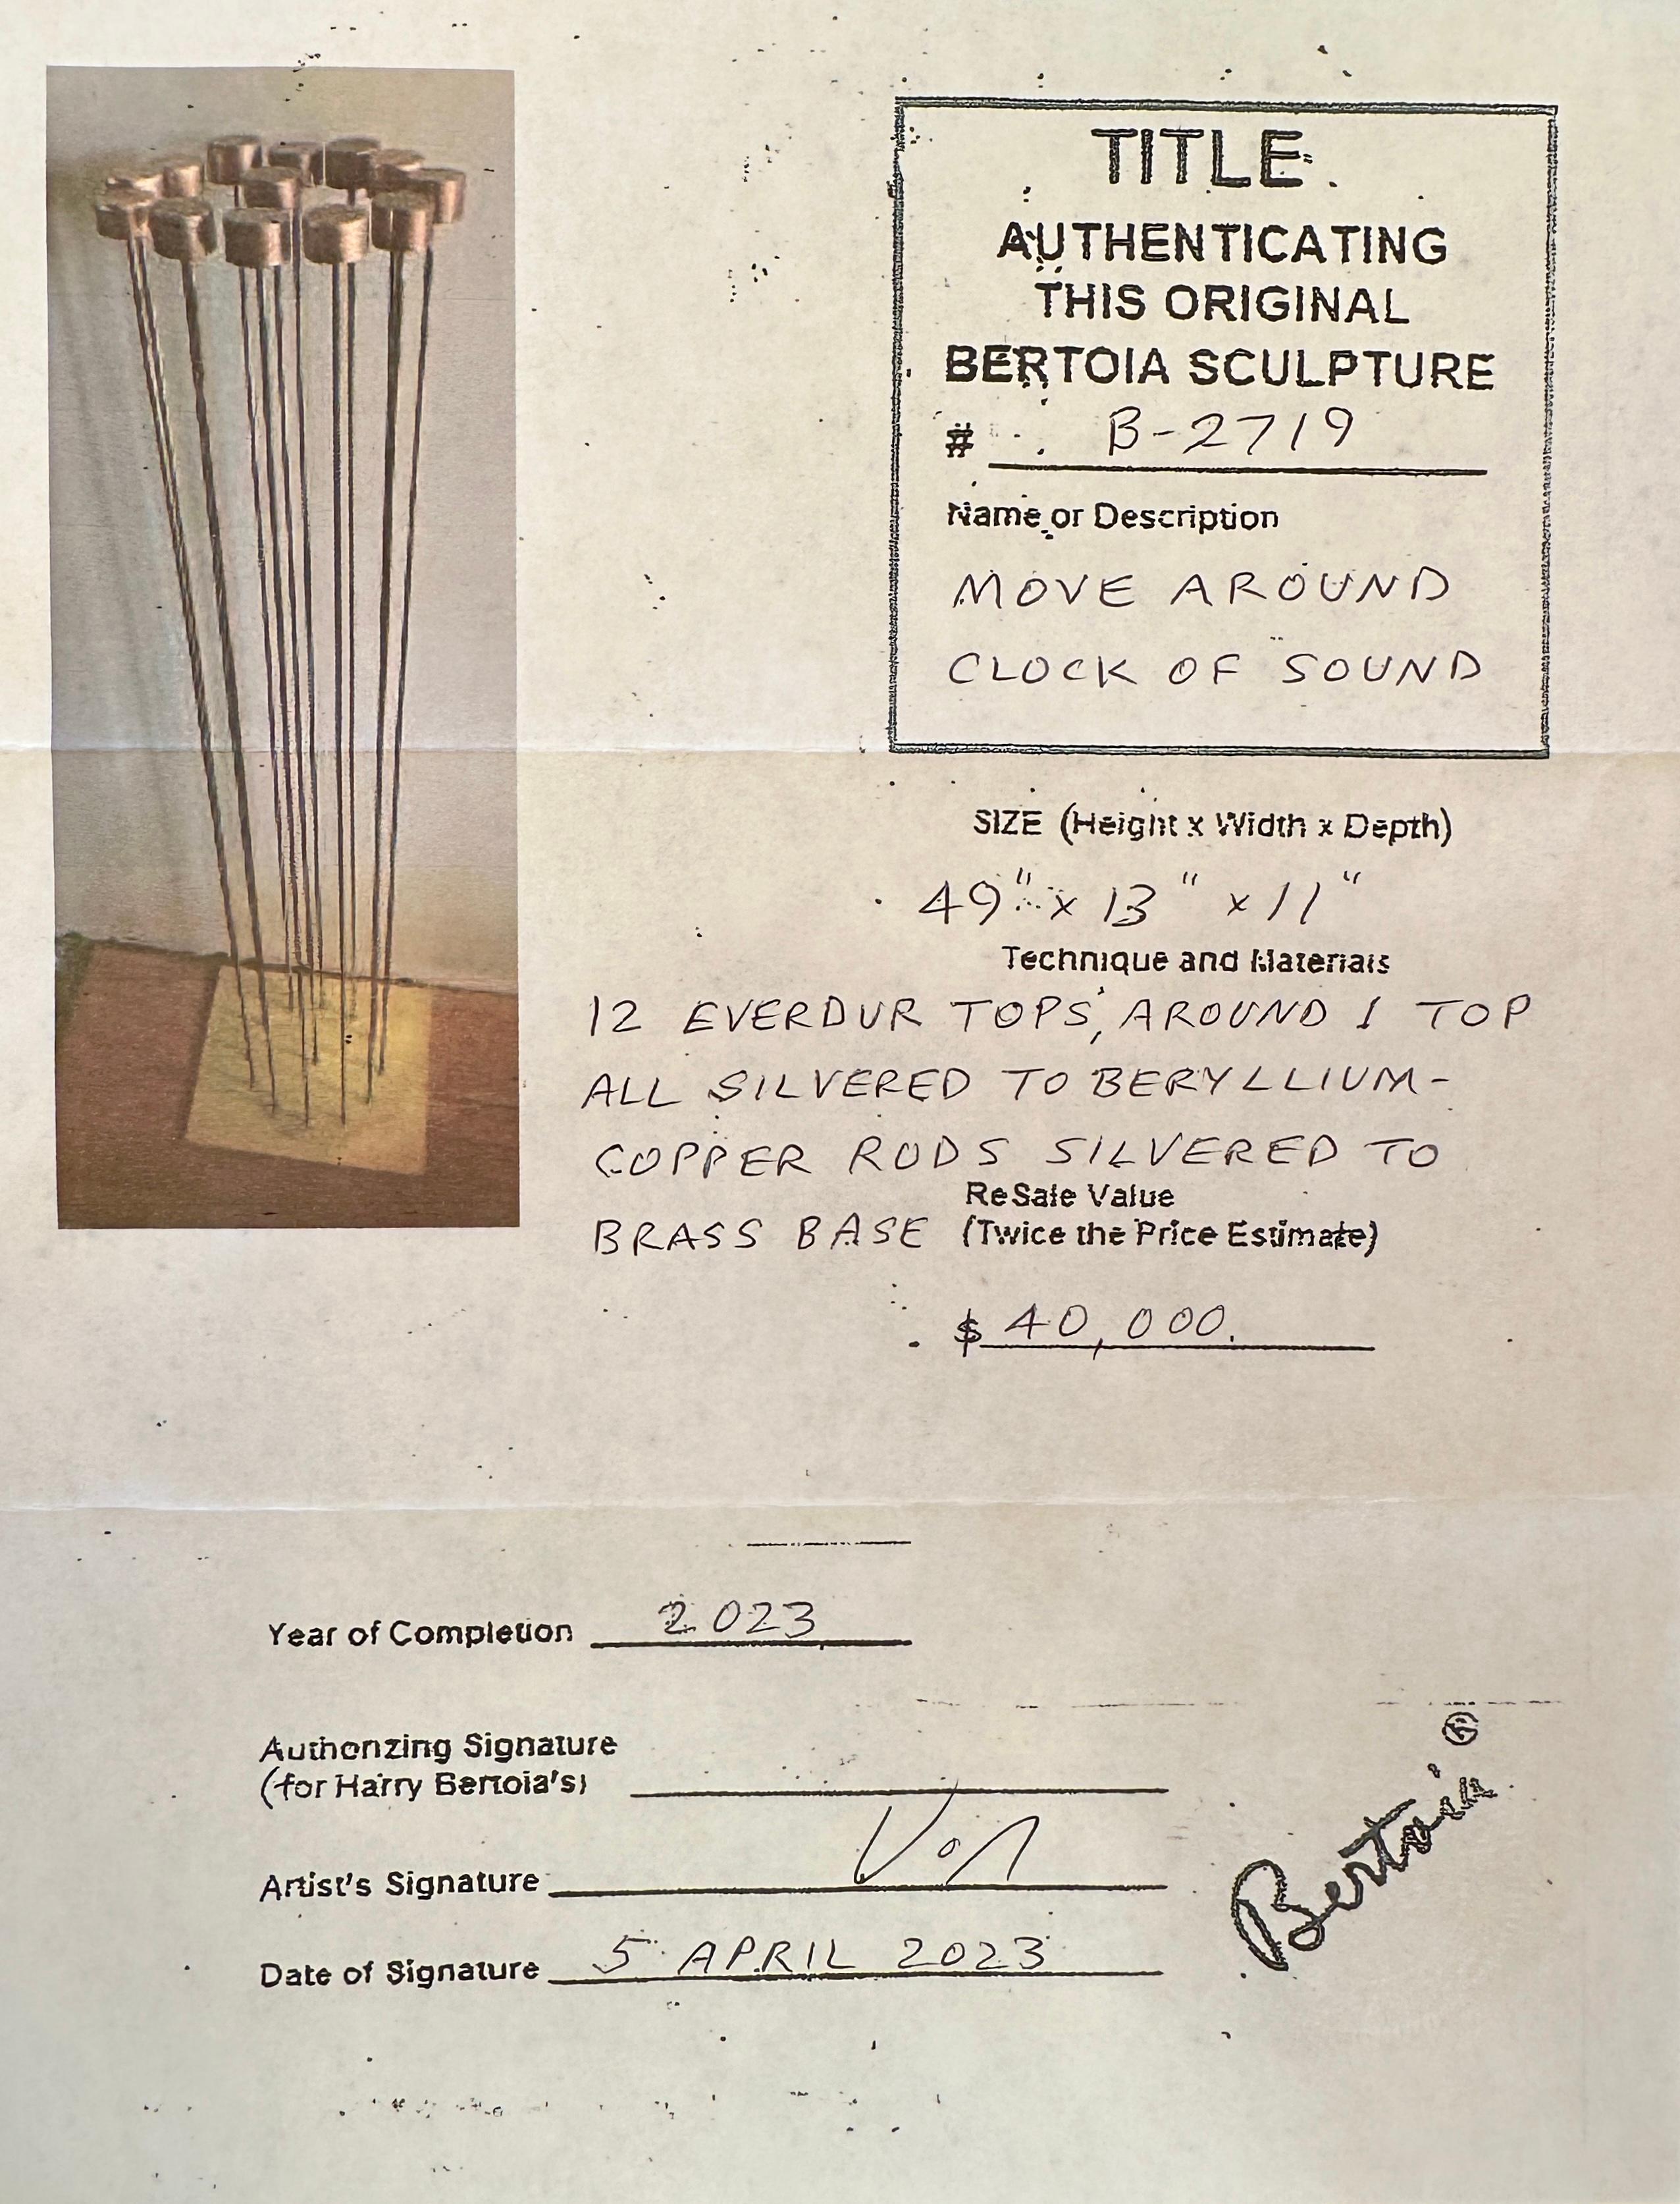 Large Bertoia Studios 13-Rod 'Move Around Clock of Sound B-2719' Metal Sculpture. A lyrical and musical sound sculpture with certificate of authenticity signed by Val, the artist and son of the original designer, Harry Bertoia. Hand made at the